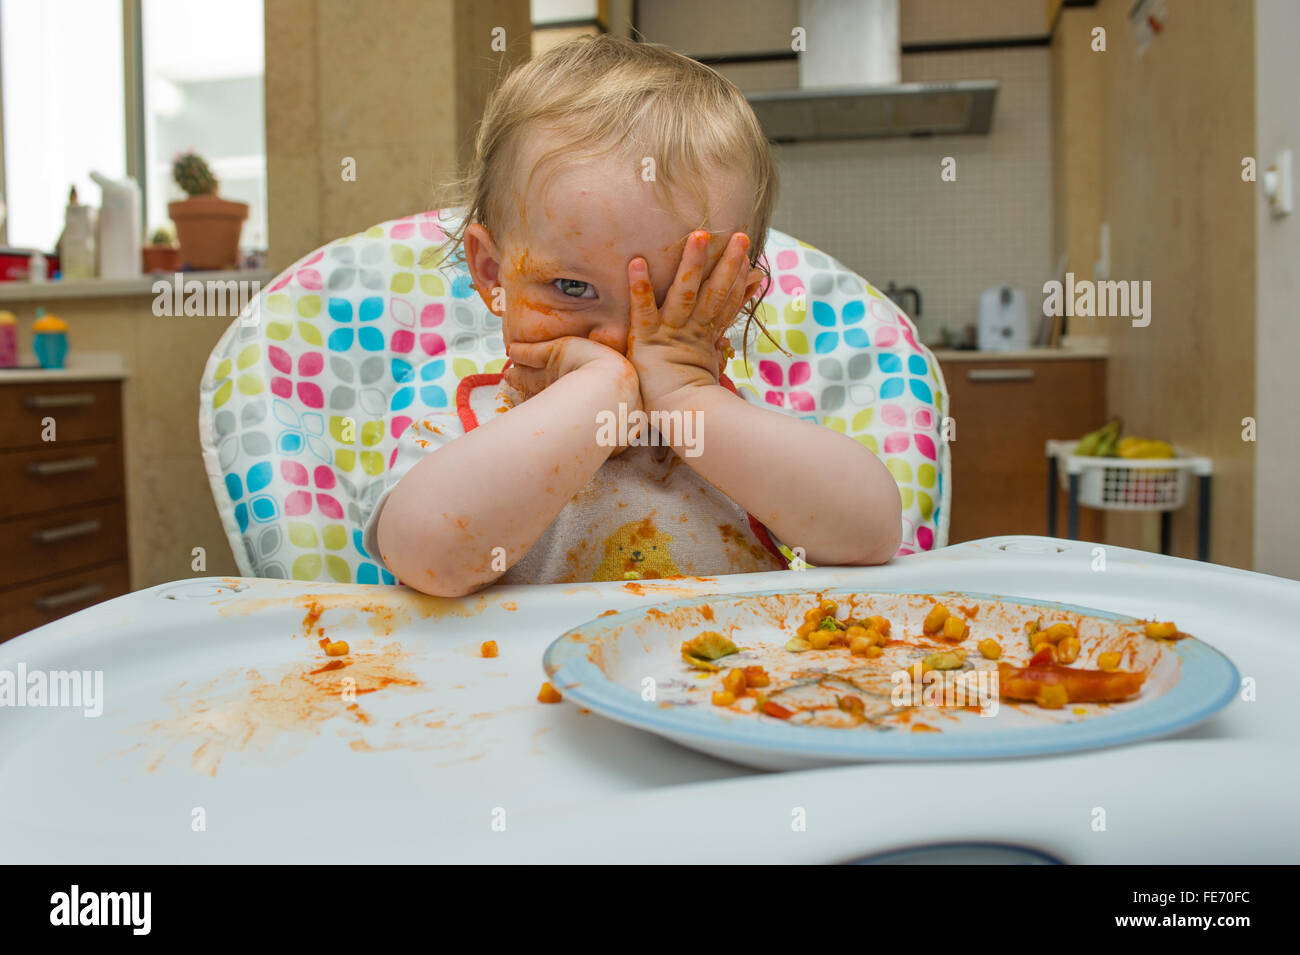 A baby girl (age 15 months) eats a meal of sweet corn and tomato sauce in a messy manner and plays with her food on a high chair Stock Photo